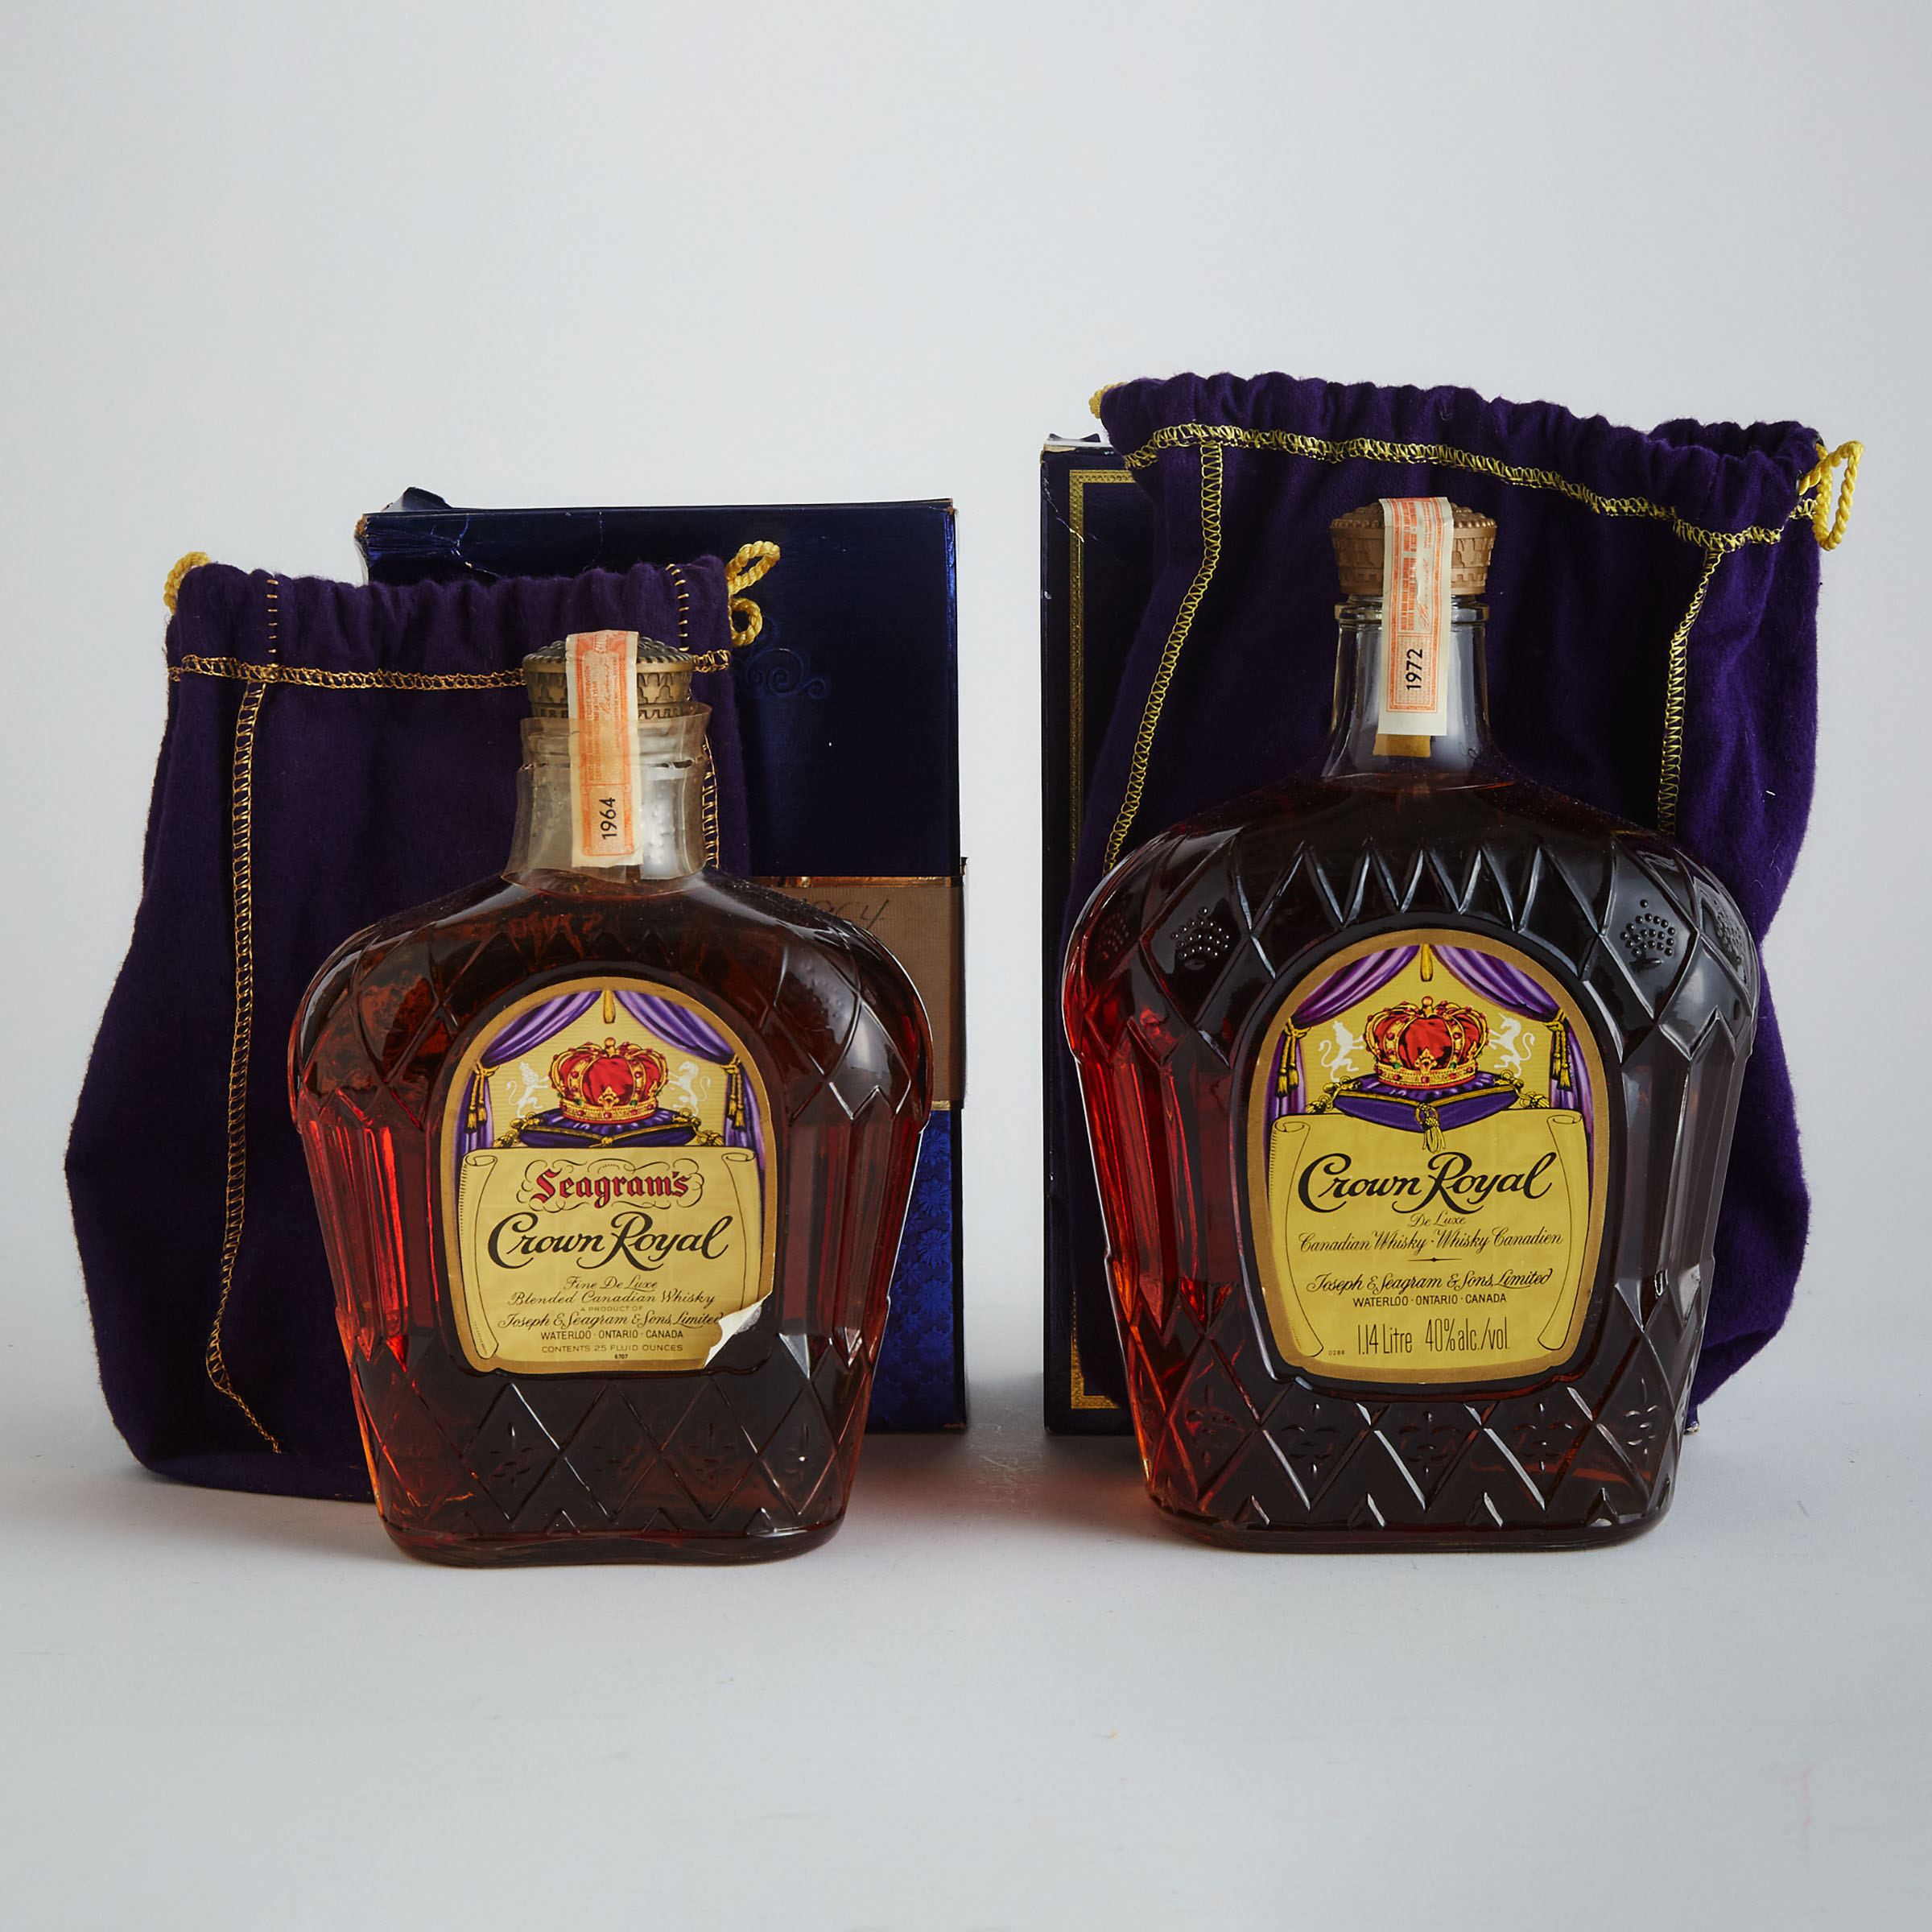 CROWN ROYAL DELUXE CANADIAN WHISKY (ONE 1.14 L)
CROWN ROYAL FINE DELUX BLENDED CANADIAN WHISKY (ONE 25 OZ)